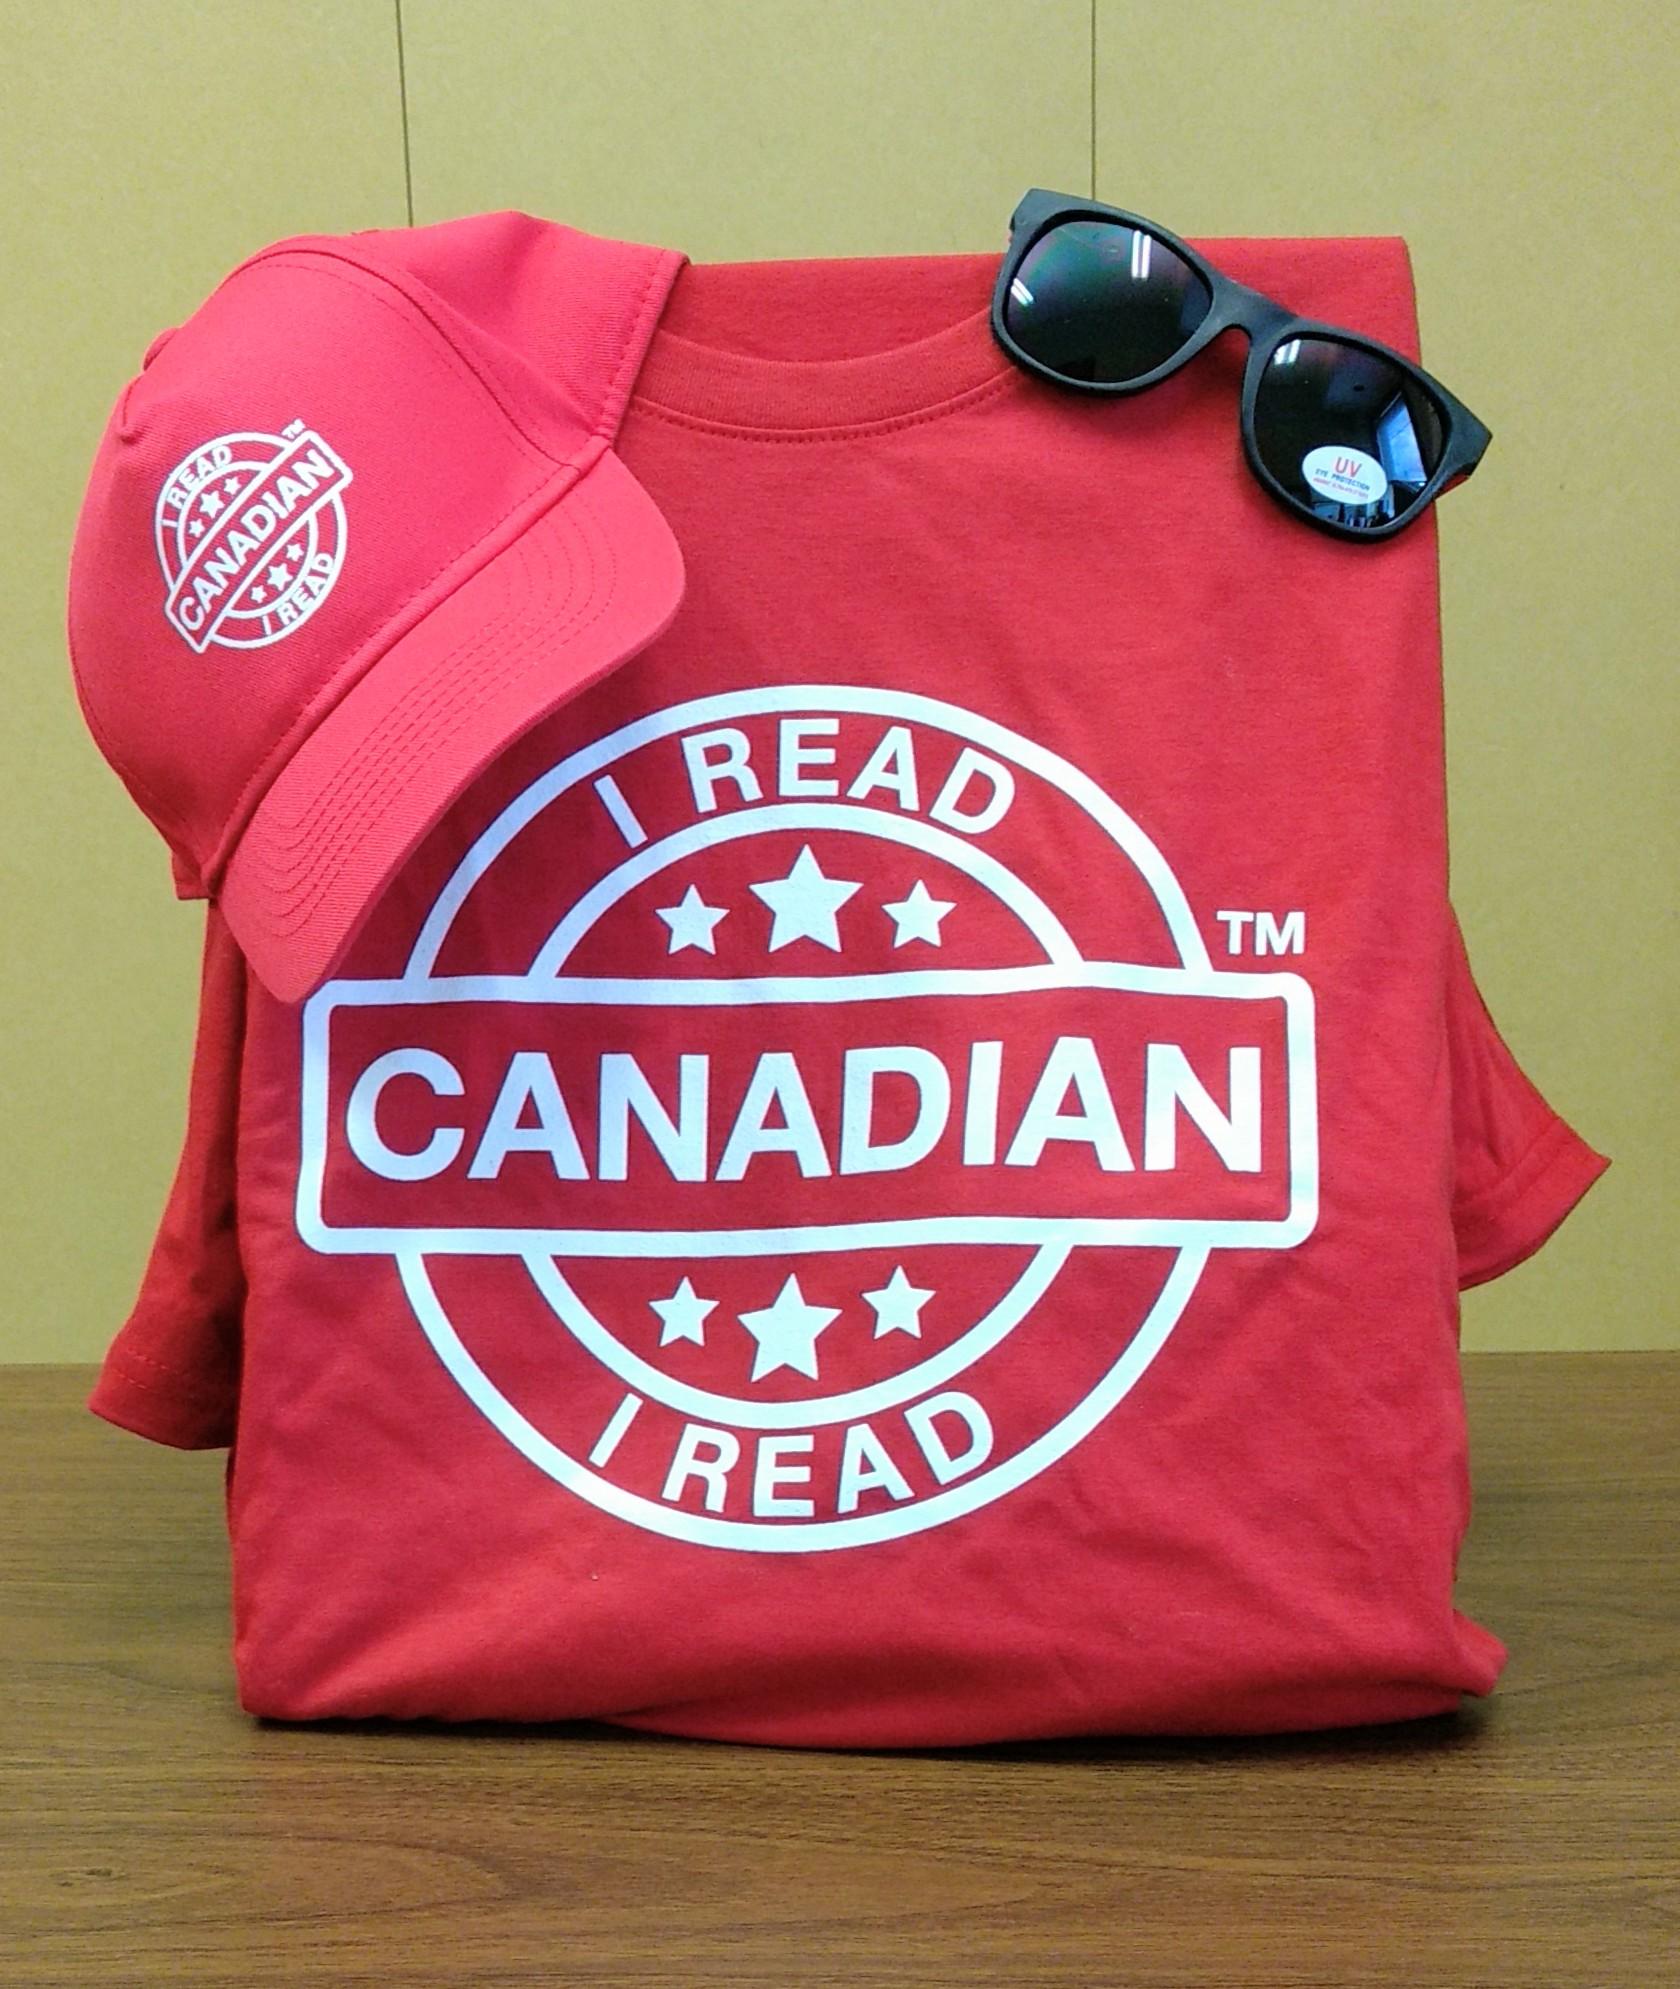 Champlain Library says: Read Canadian and win